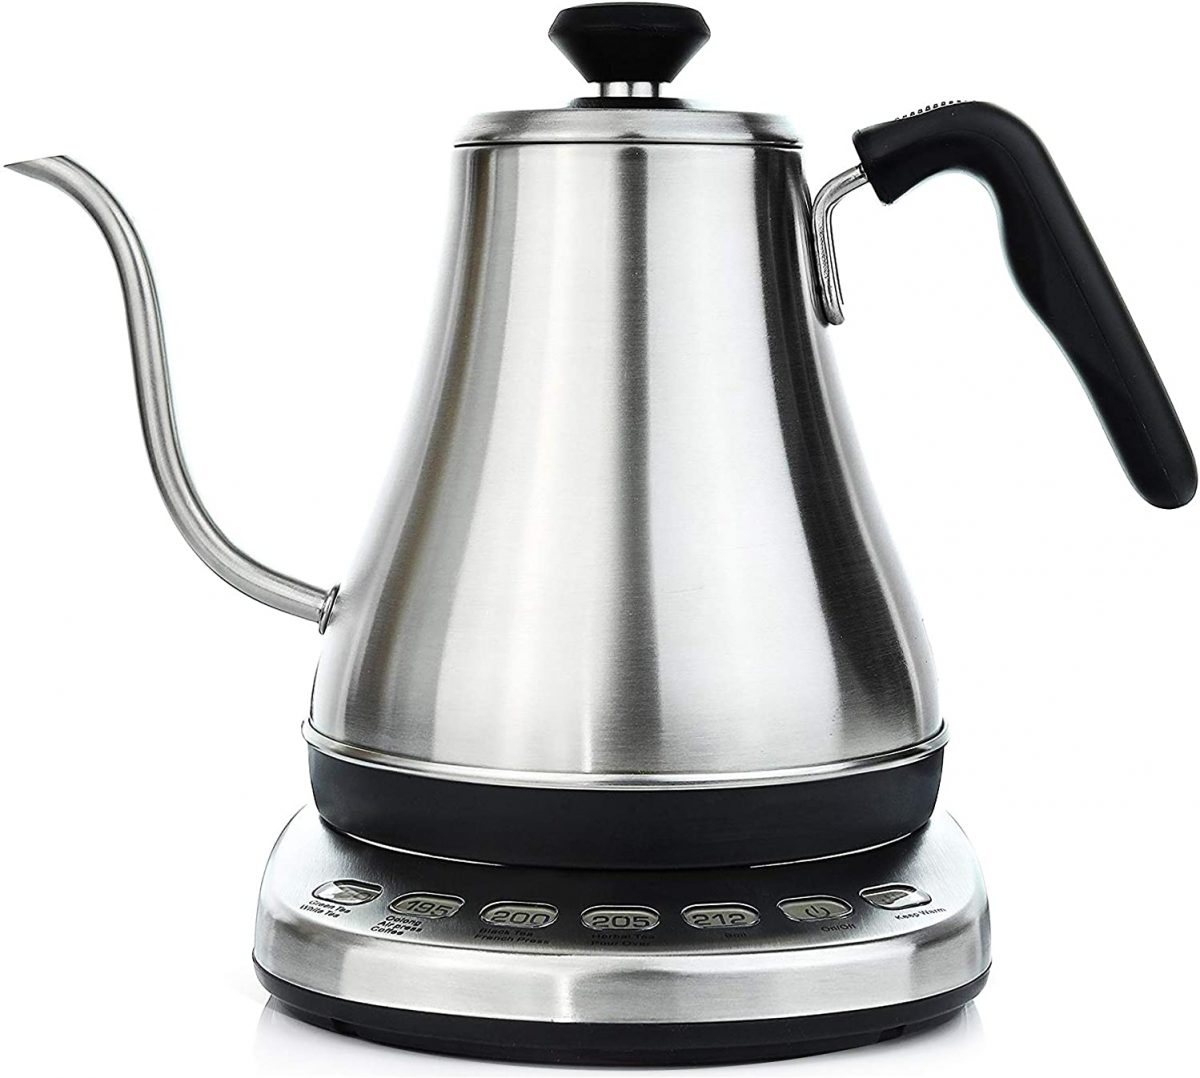 10 Best Electric Tea Kettle With Temperature Control in 2023